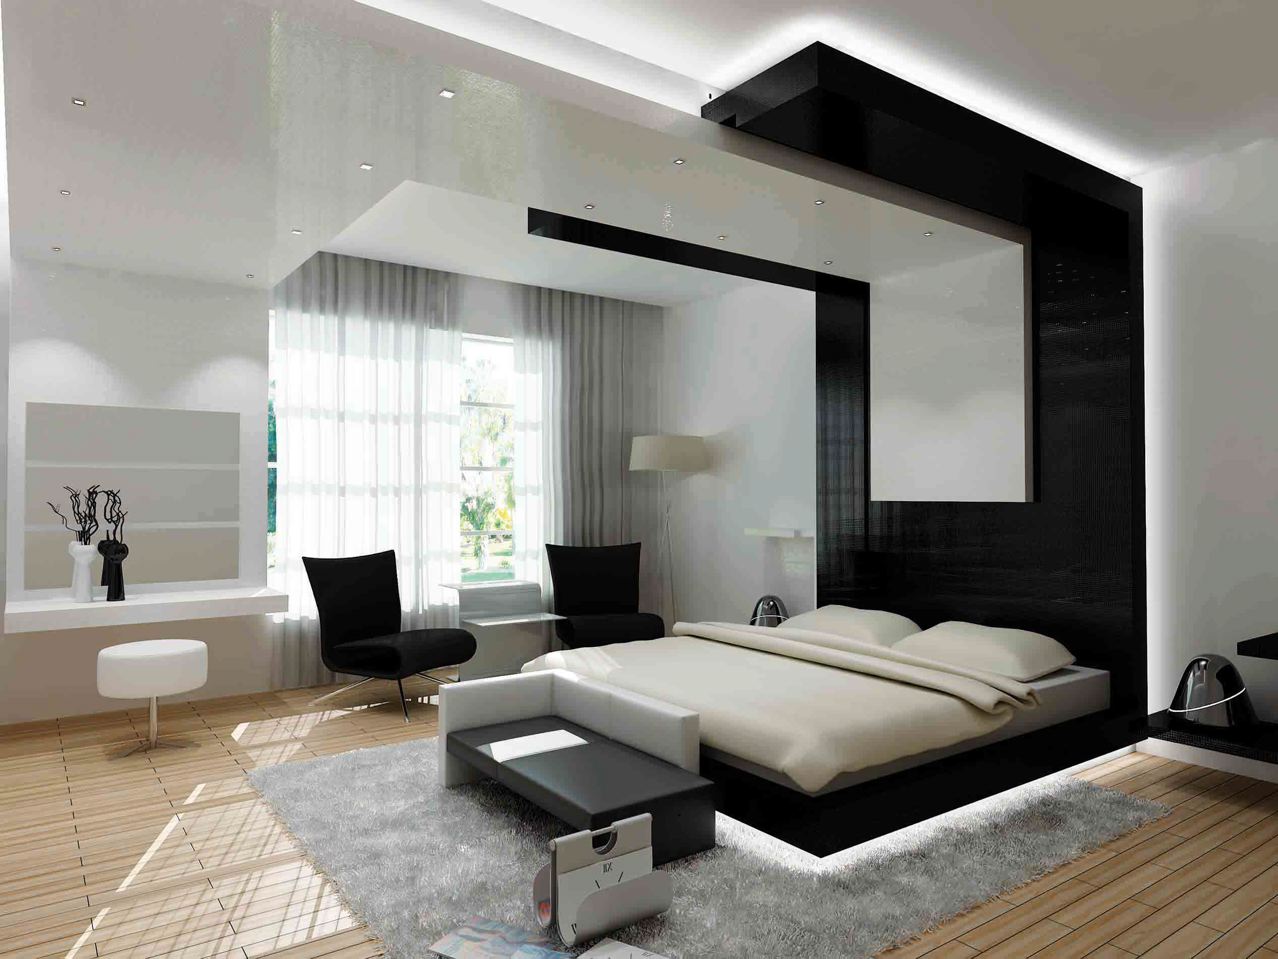 25 Best Bedroom Designs Ideas - The WoW Style